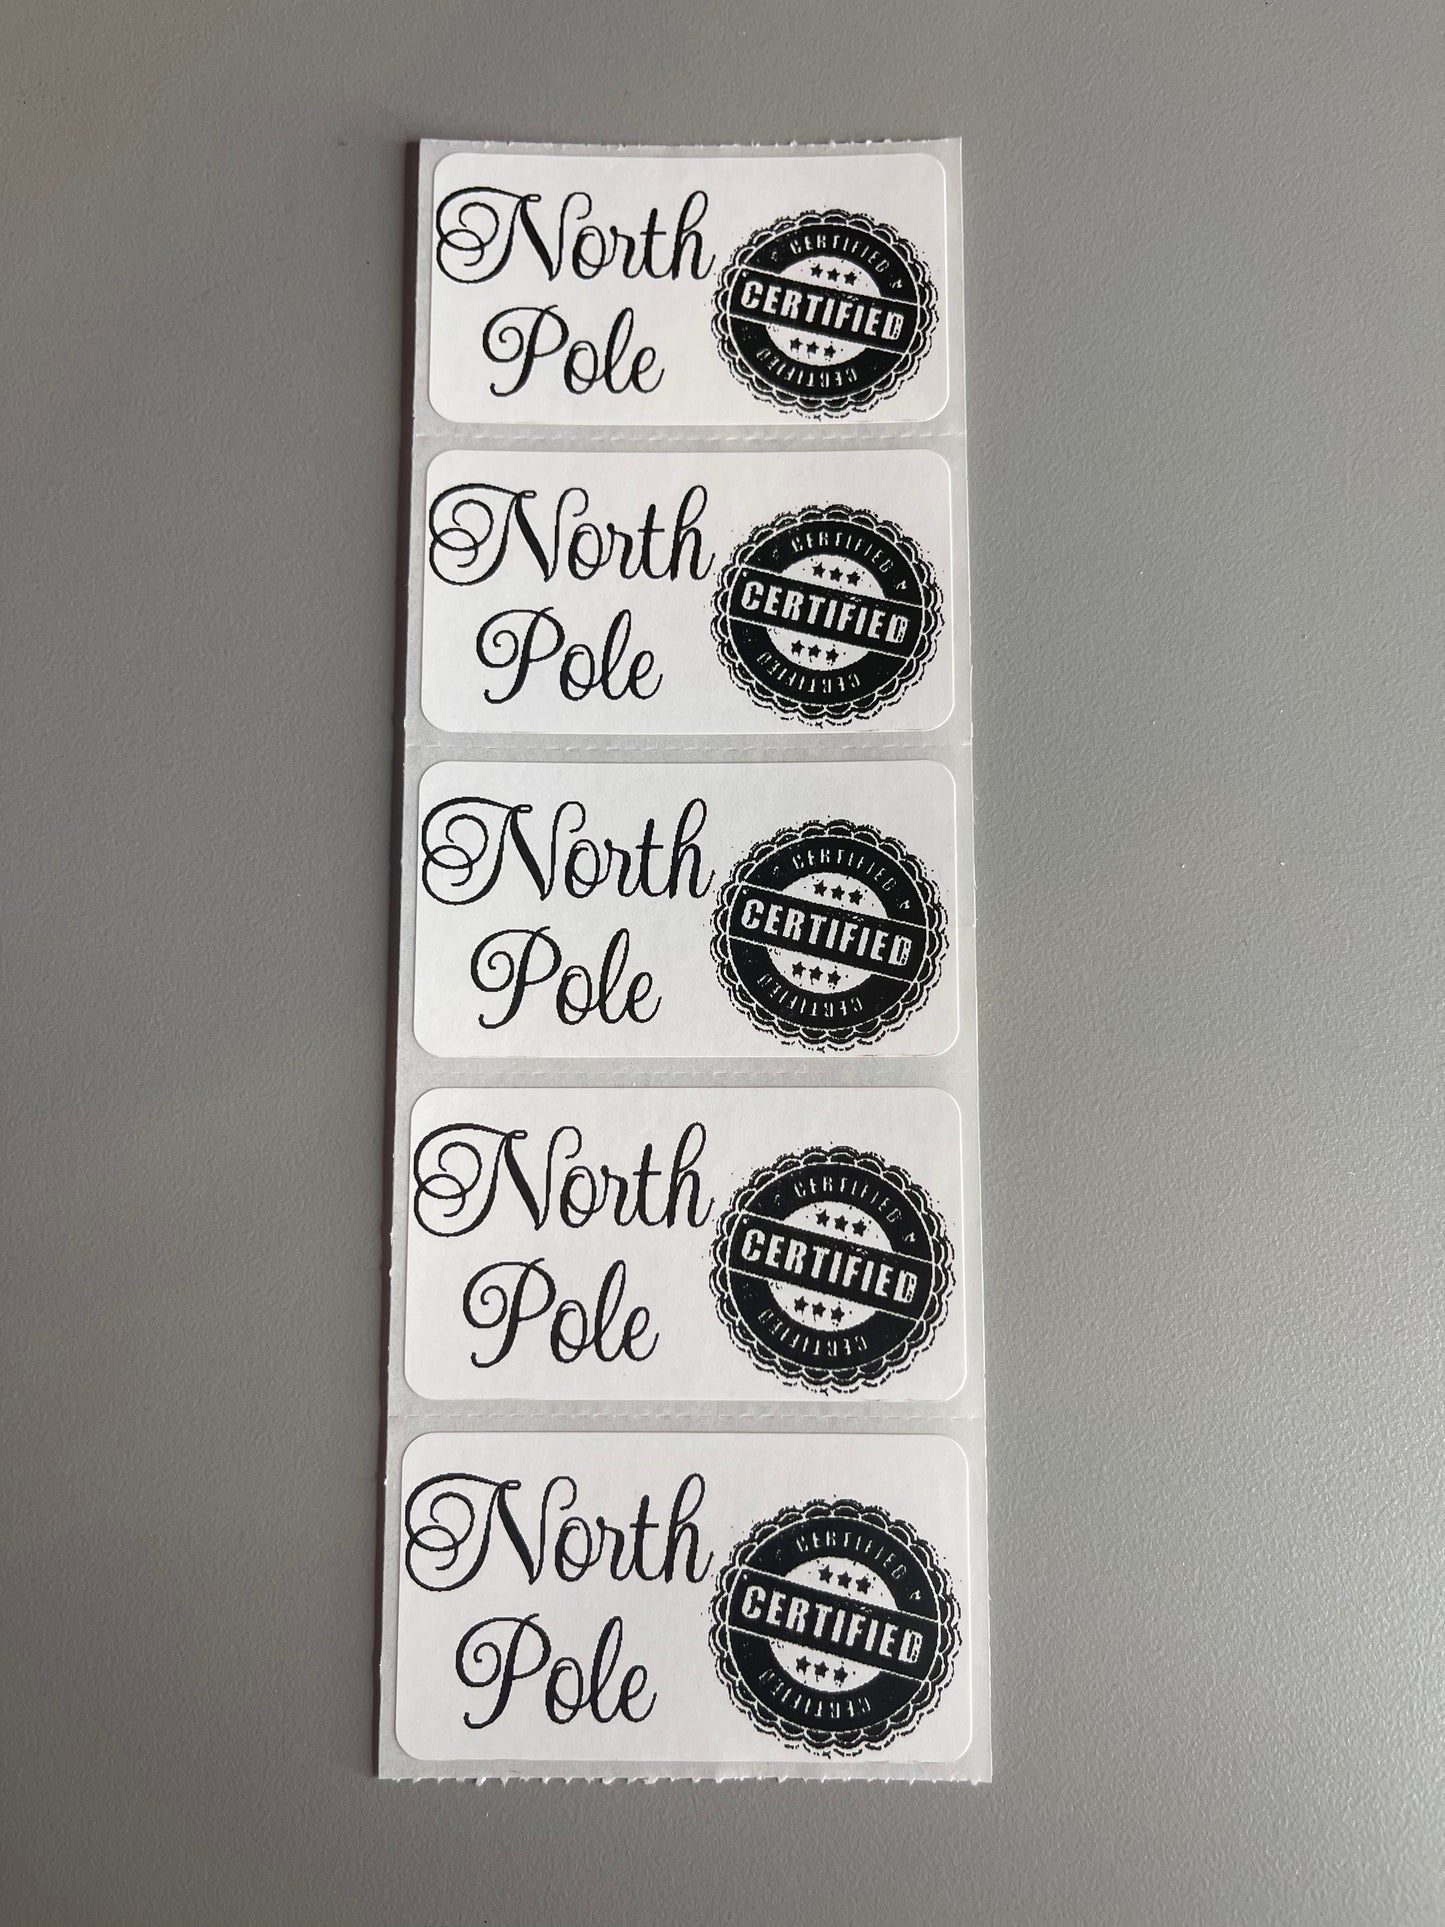 North Pole Certified Stickers